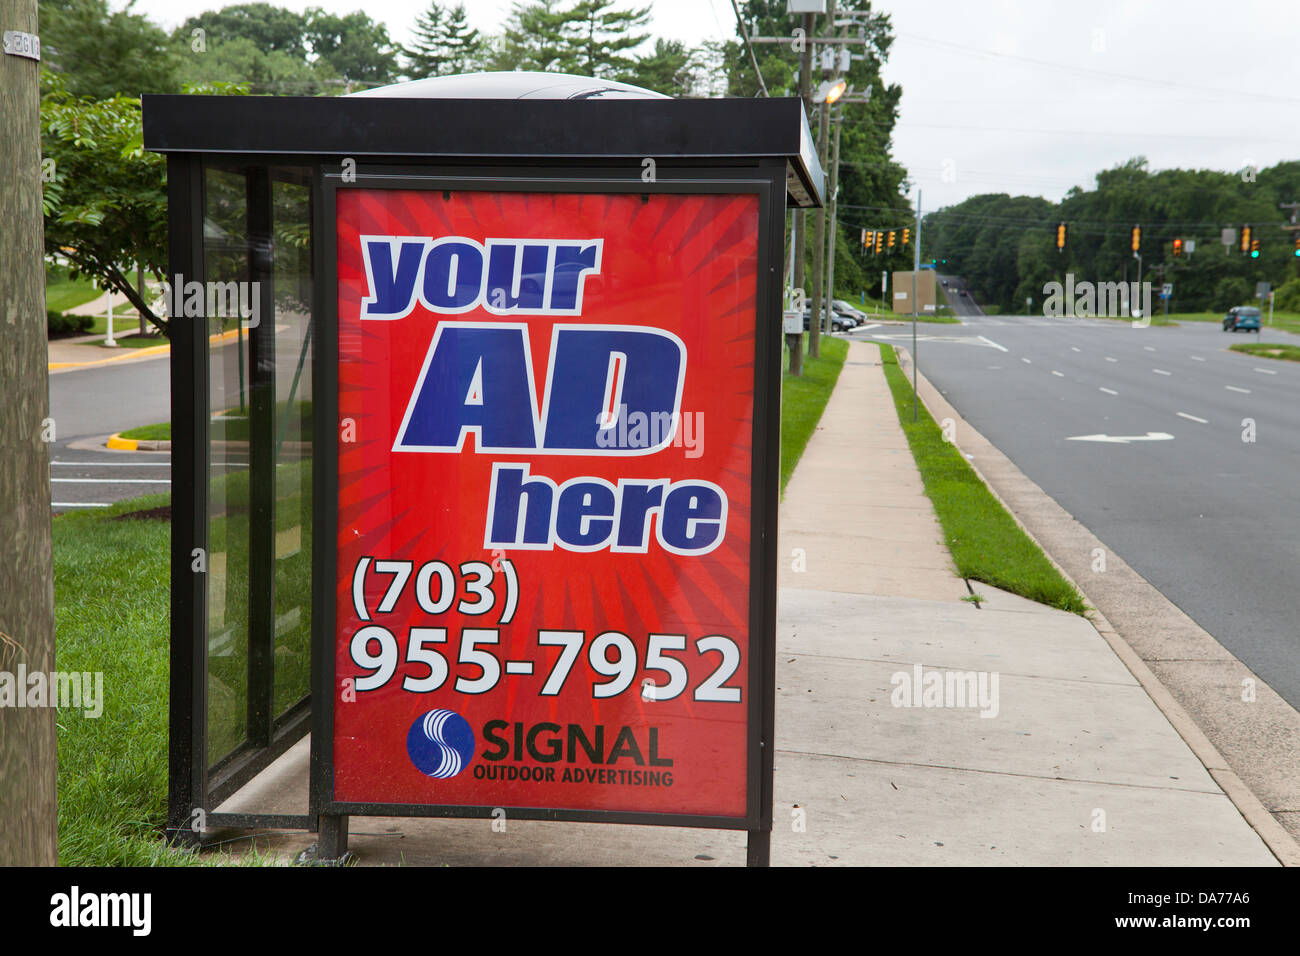 Covered bus stop ad space advertisement - Virginia, USA Stock Photo